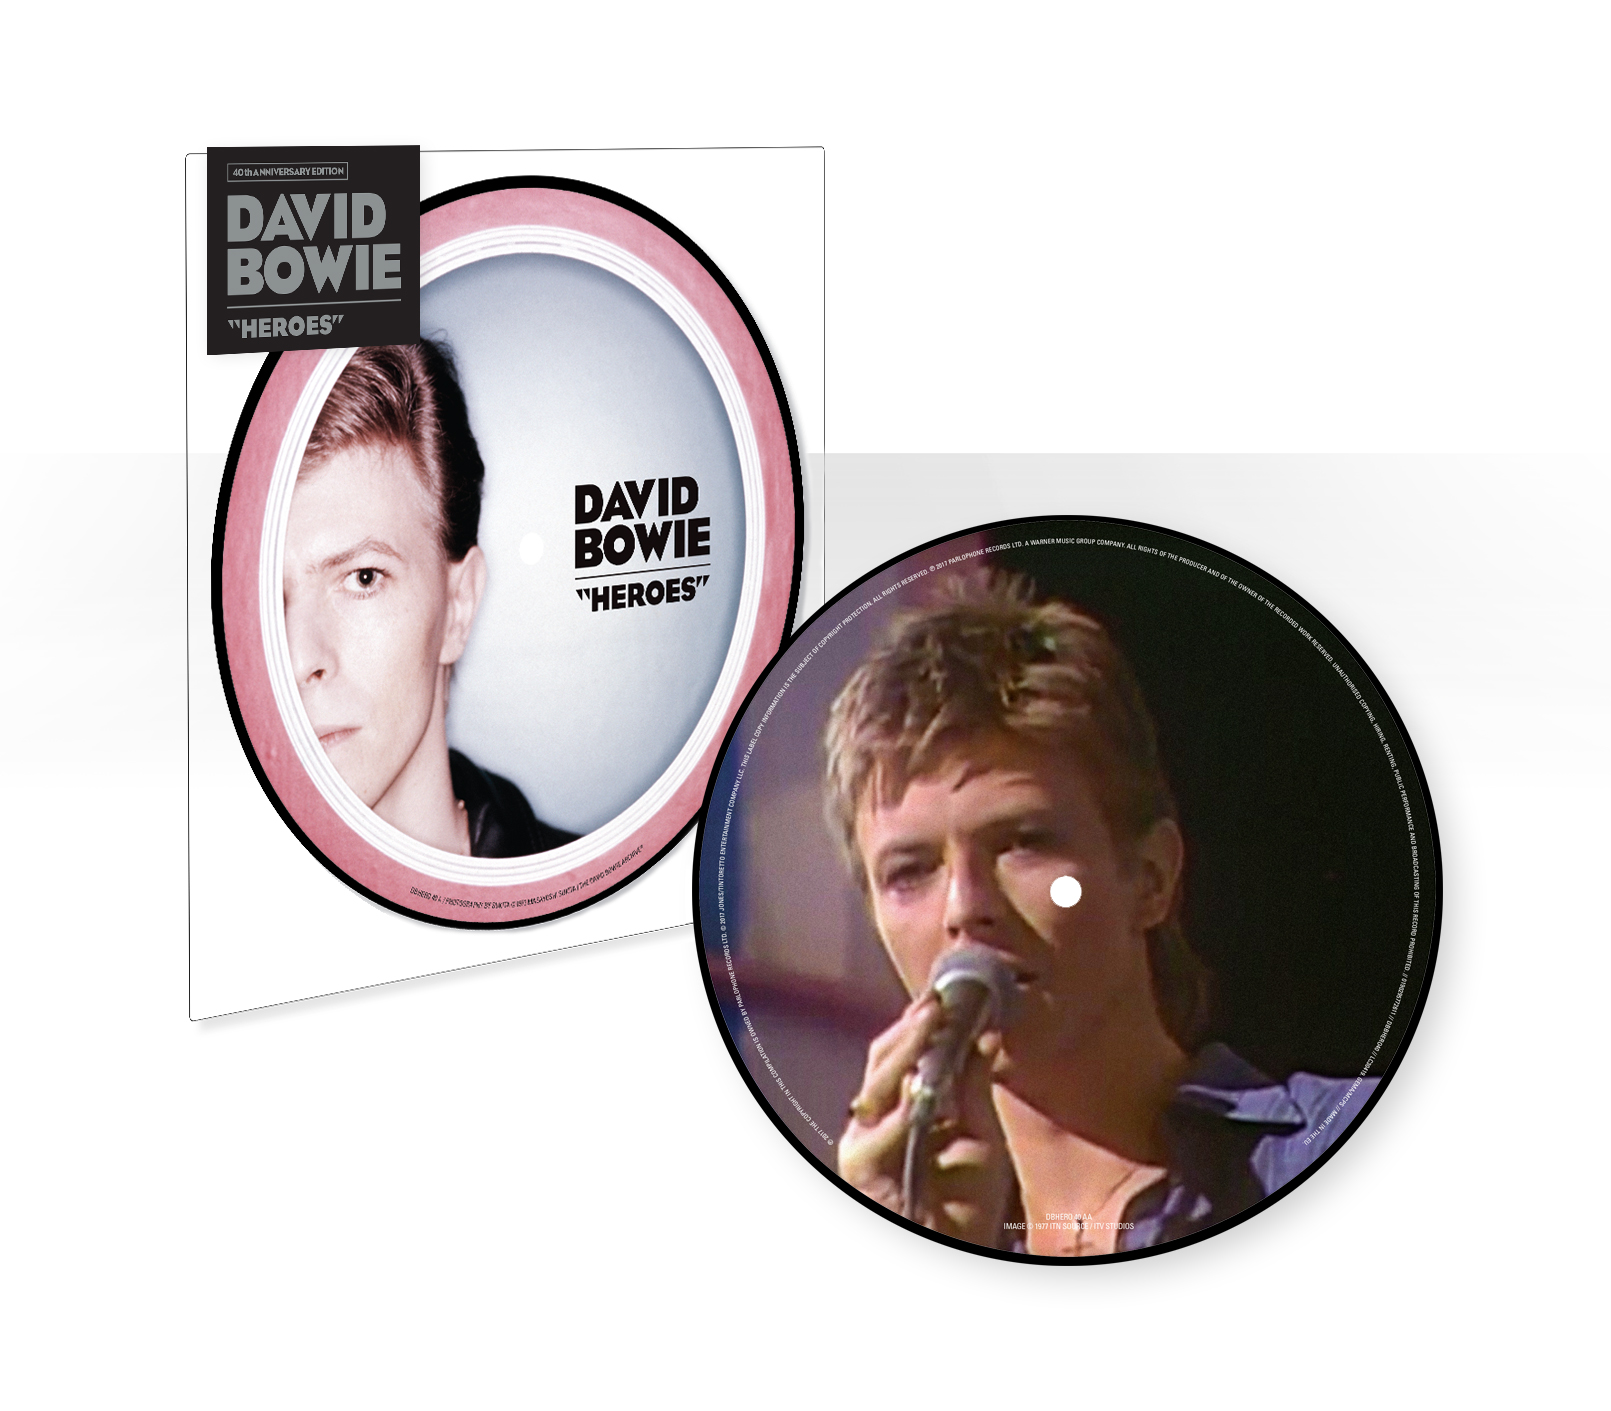 David Bowie's 40th anniversary edition single of 'Heroes'